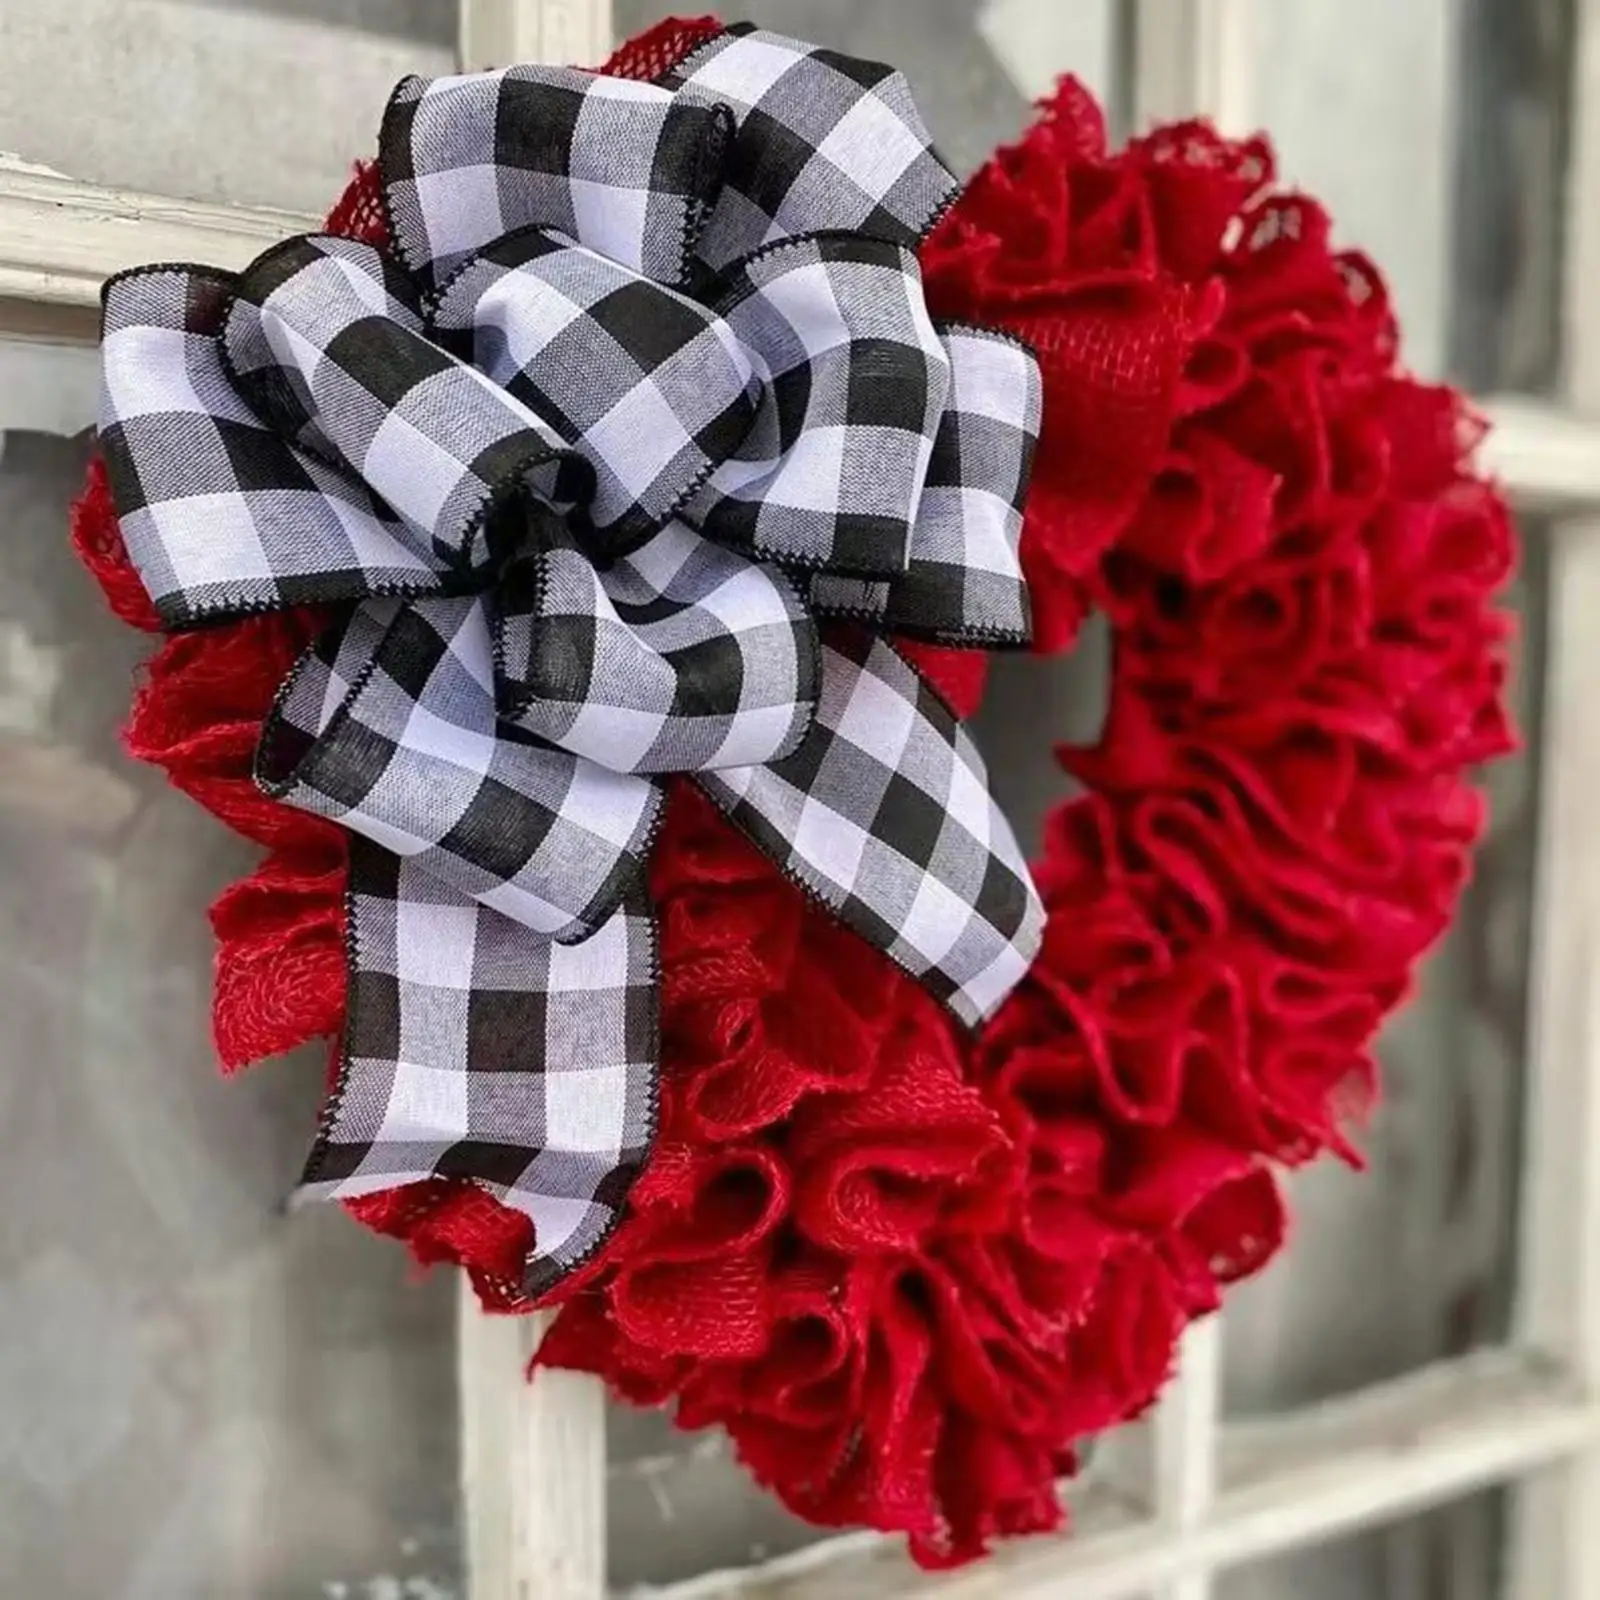 Red Heart Shaped Wreath 5.7in Plaid Bowknot Front Door Artificial Garland for Home Farmhouse Decoration